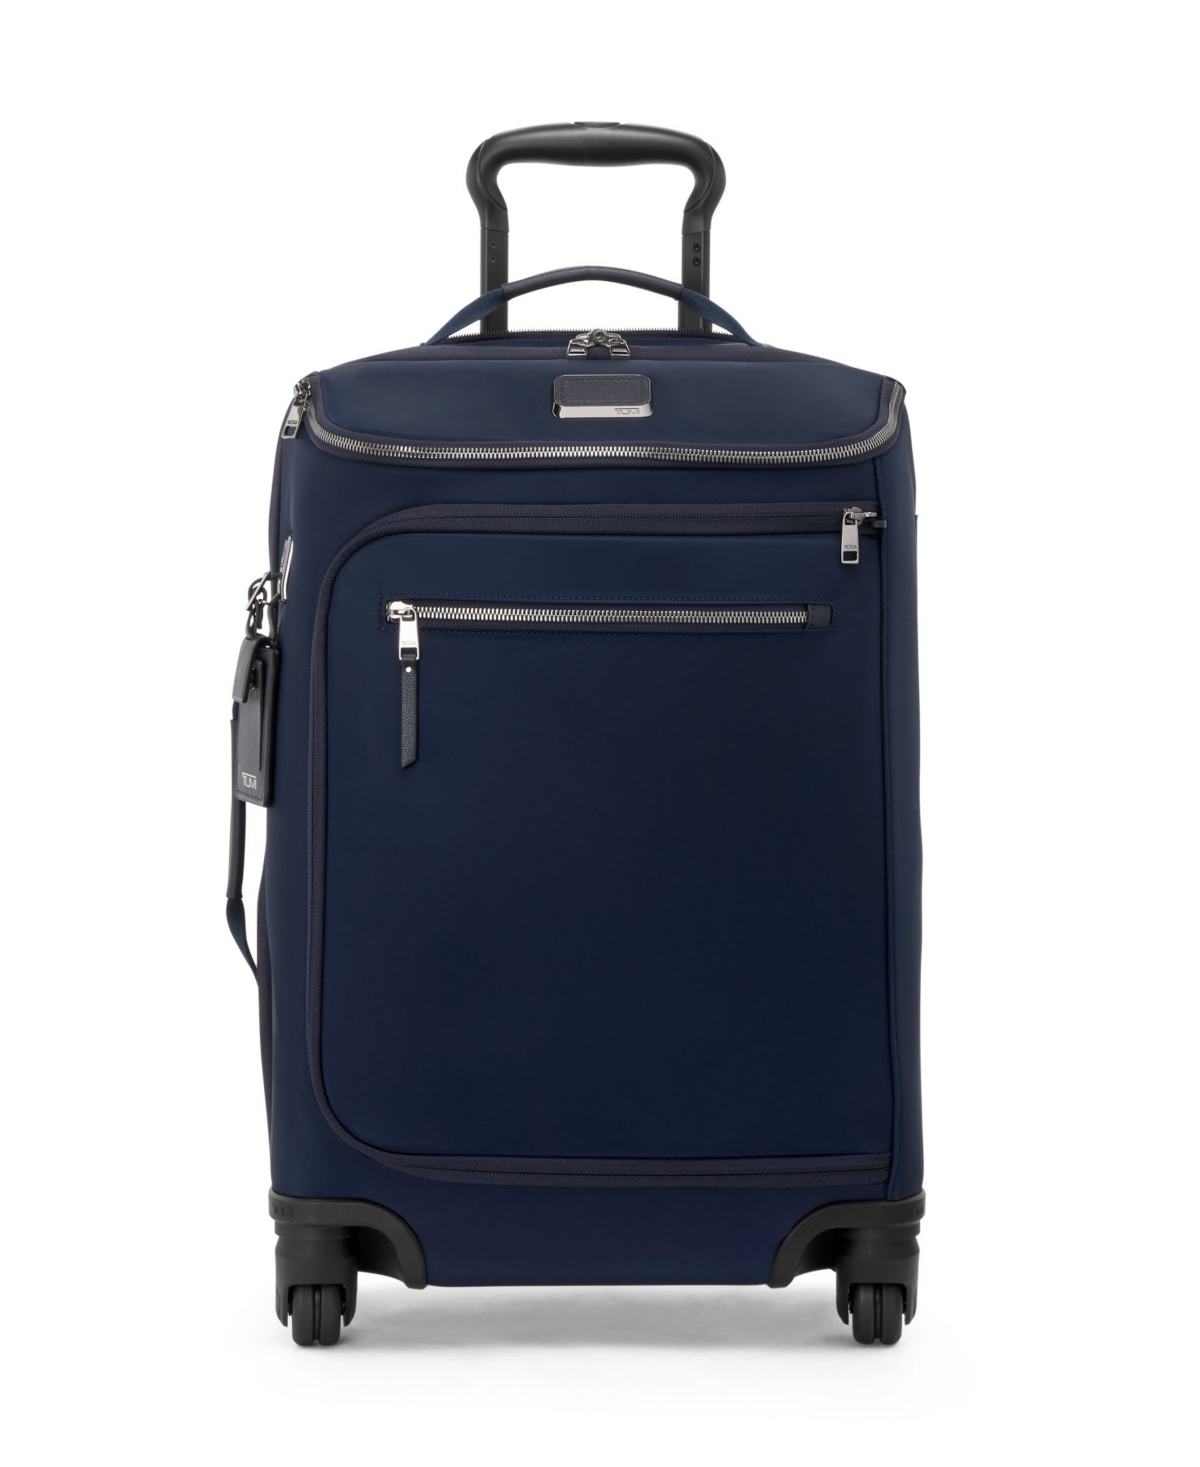 Tumi Voyageur Leger International Carry-on In Black/silver